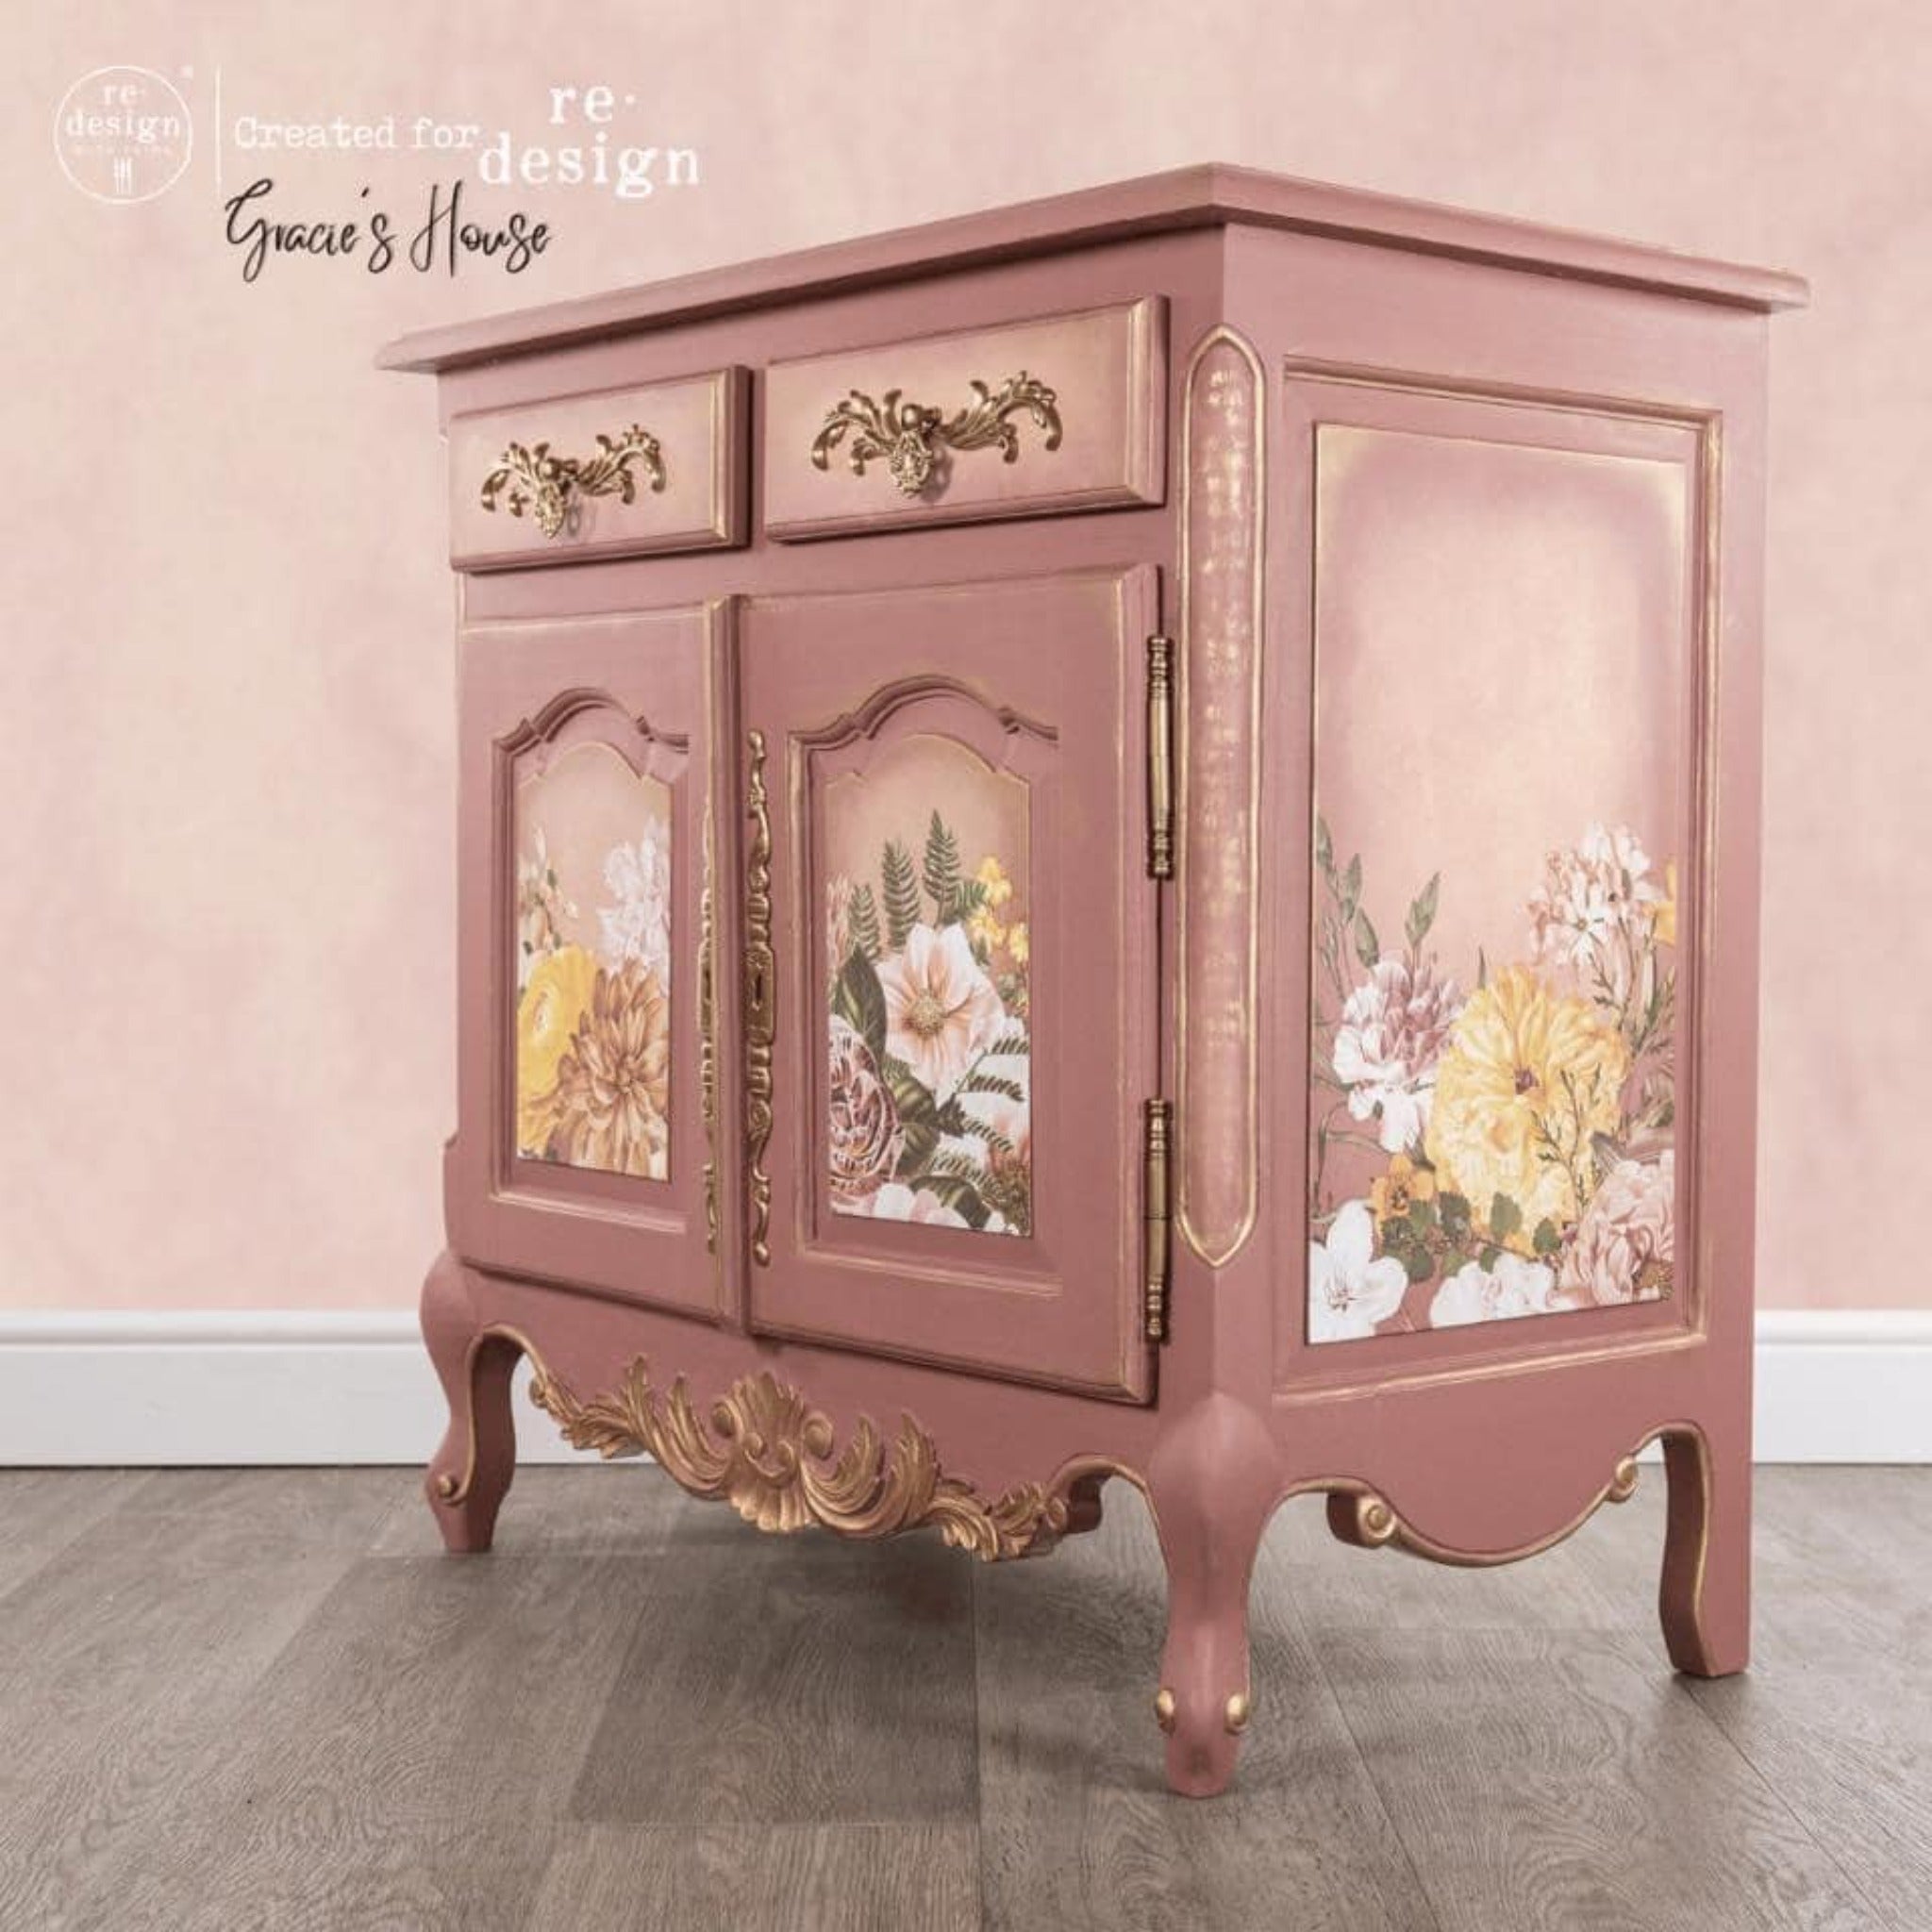 A vintage small buffet table refurbished by Gracie's House is painted mauve pink and features ReDesign with Prima's Kacha Woodland Floral transfer on its 2 door inlays and the side panel inlay.